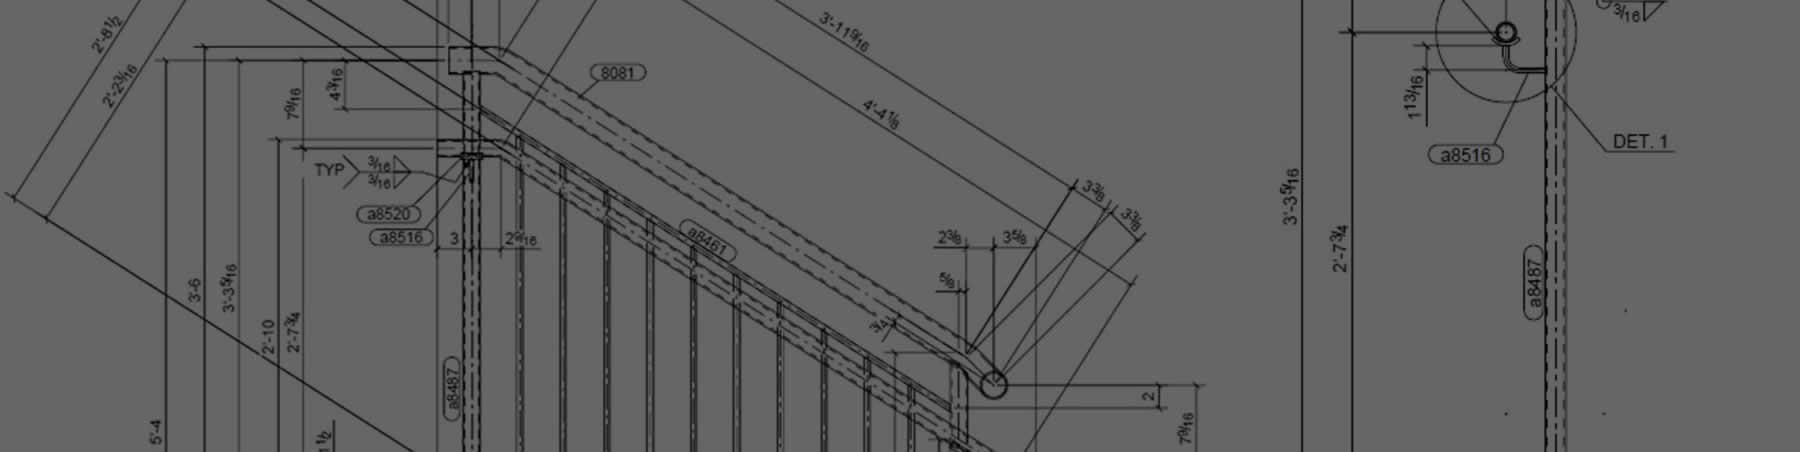 Structural Steel Shop Drawings Services - Steel Structural Consultant